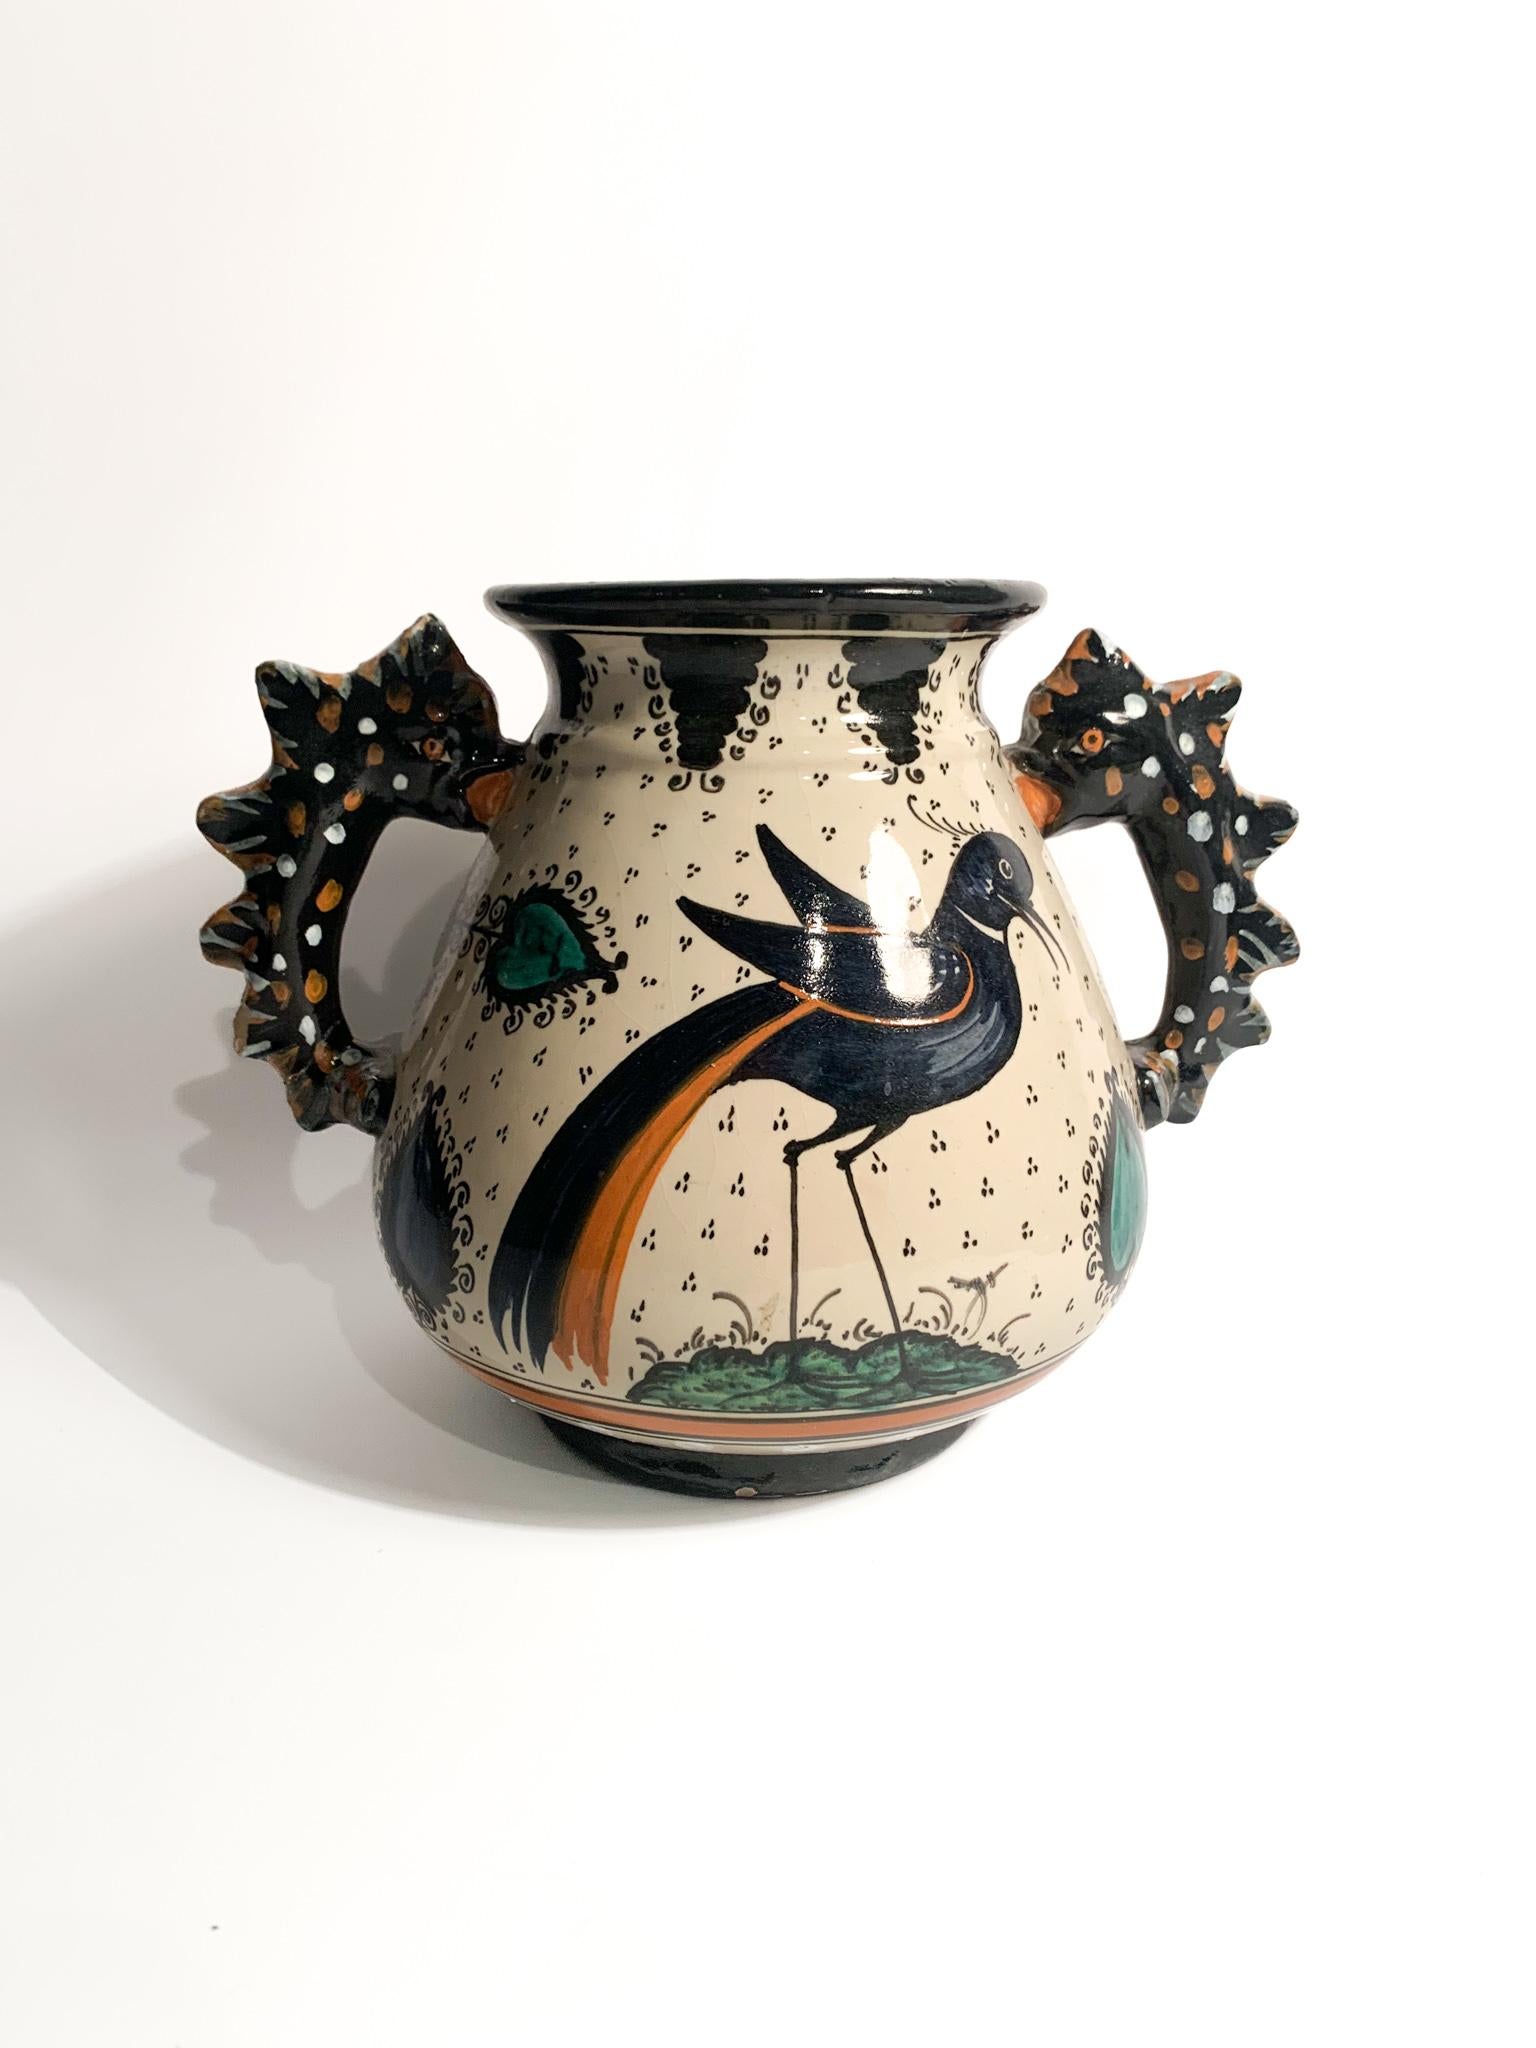 Hand-painted ceramic vase, made by Molaroni Pesaro in the 1950s. The vase has some small chips, as shown in the pictures. 

Ø cm 23 h cm 17

Since 1880, the Ceramiche Molaroni factory, founded in Pesaro, has been producing hand-made furnishing